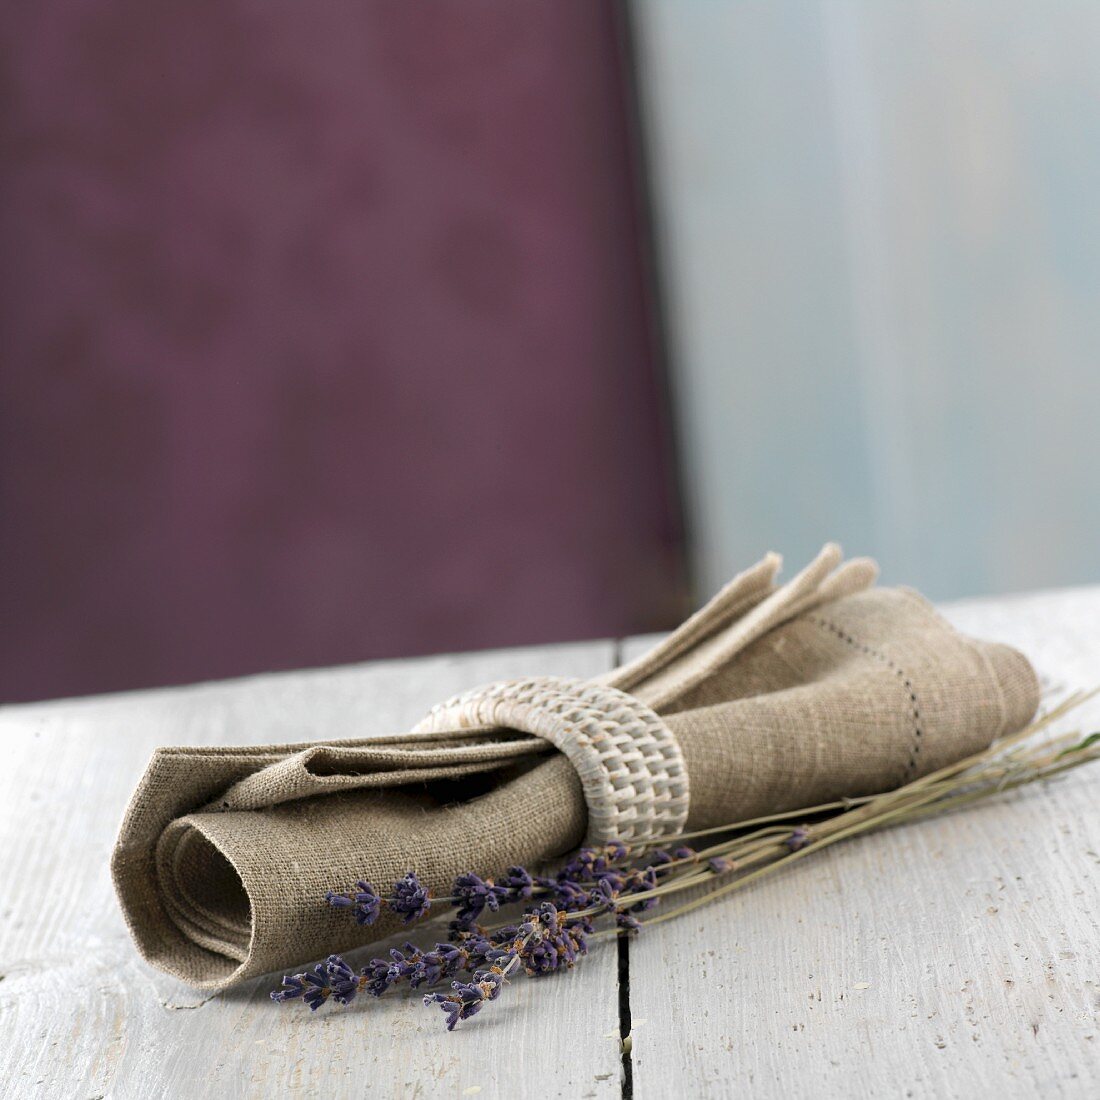 A napkin with a napkin ring and lavender flowers from Provence